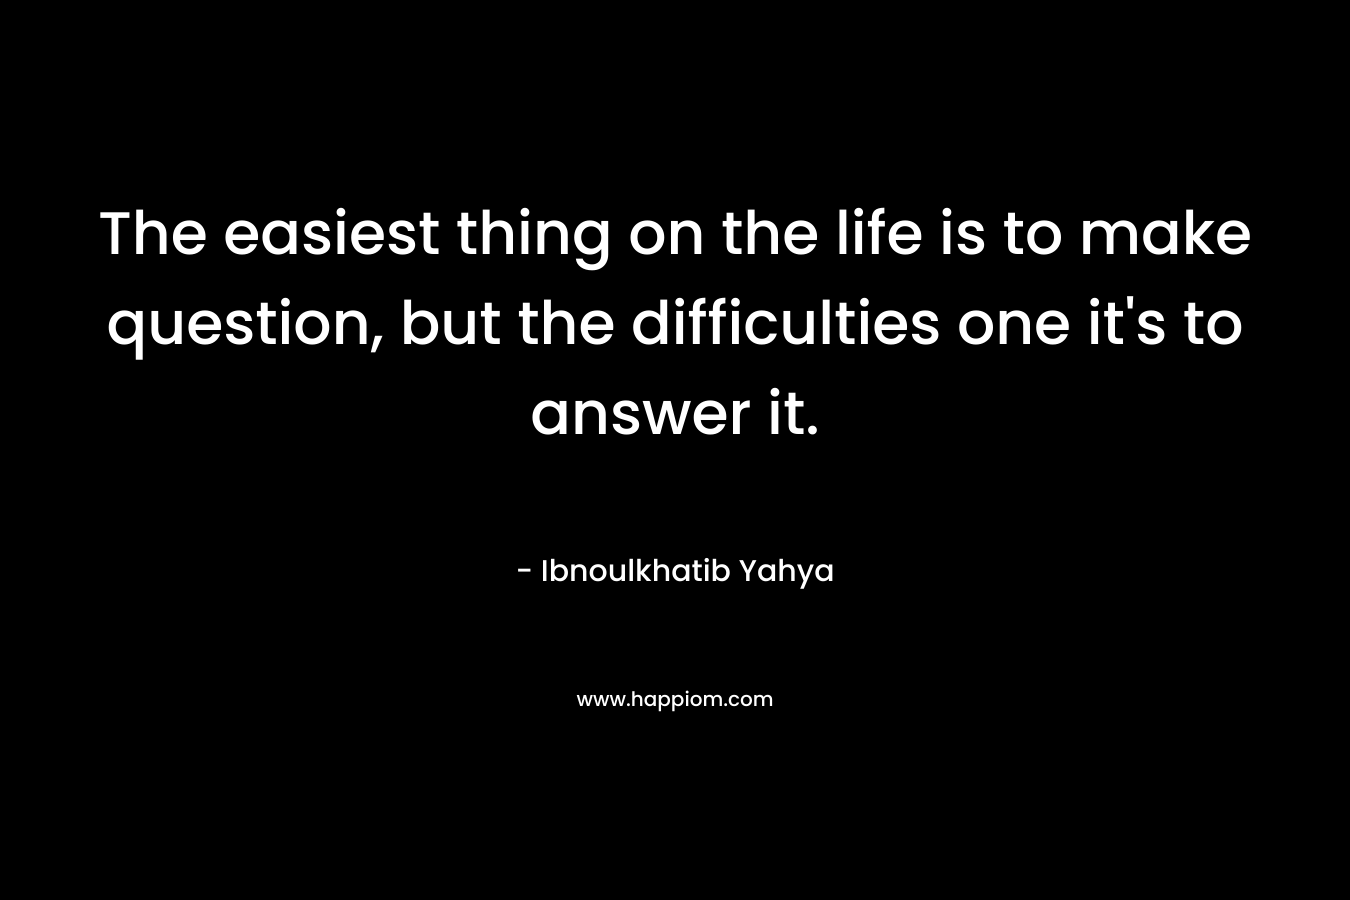 The easiest thing on the life is to make question, but the difficulties one it's to answer it.